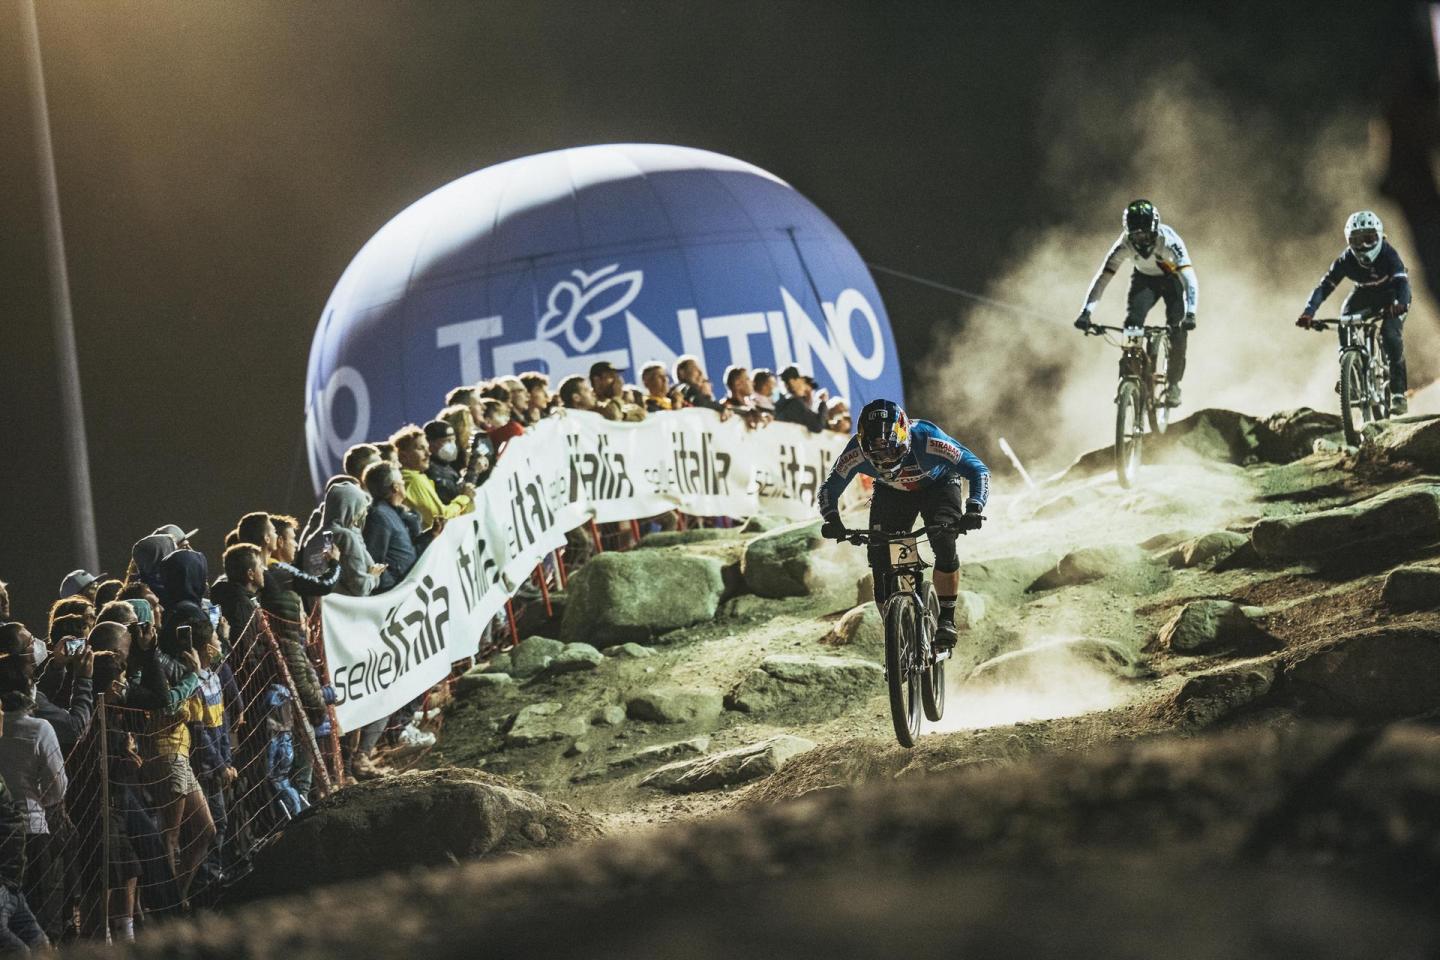 4X Pro Tour World Series Final to be held in Val di Sole